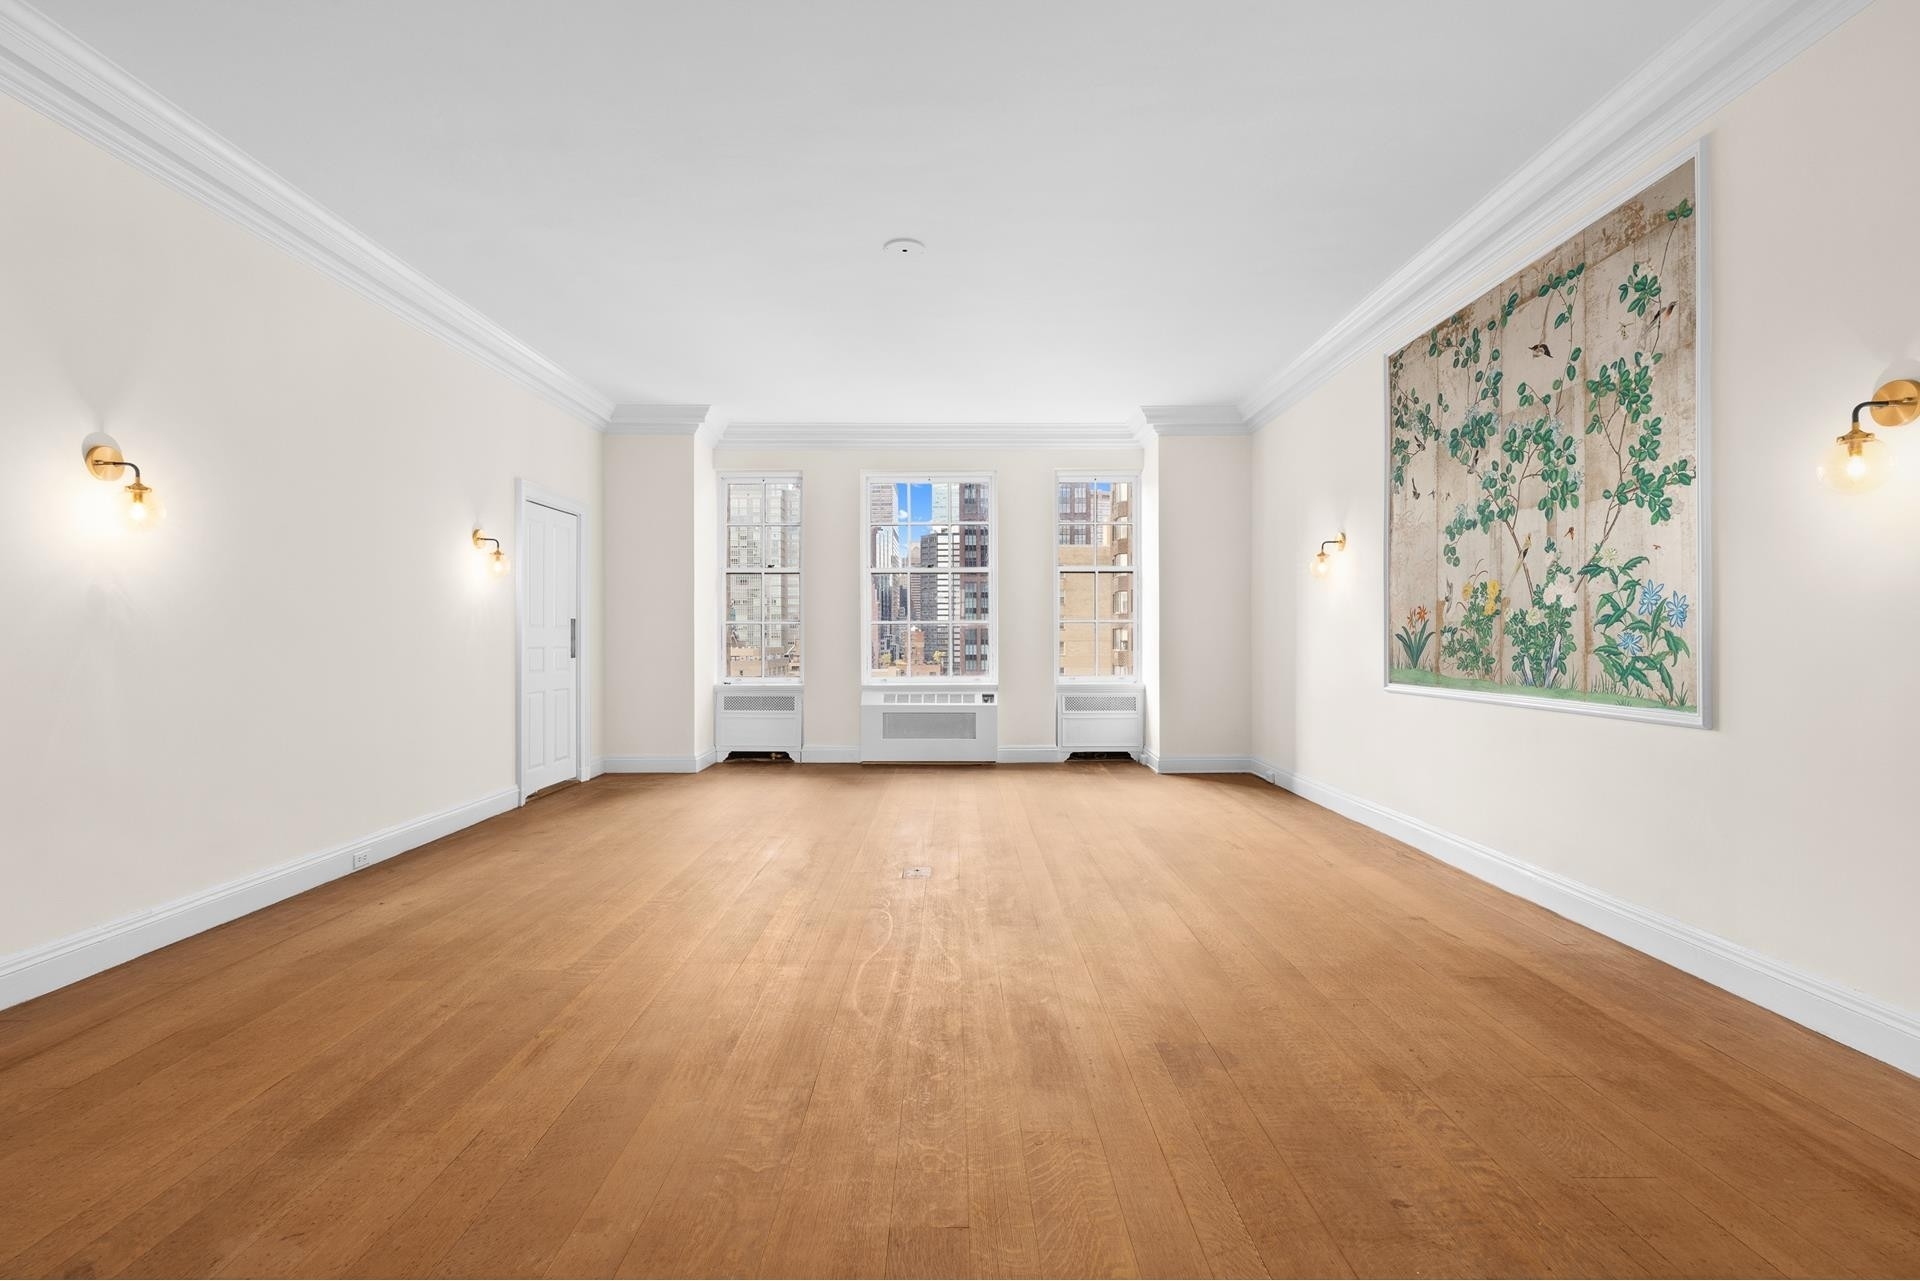 9. Co-op Properties for Sale at RIVER HOUSE, 435 E 52ND ST, 13B Beekman, New York, New York 10022